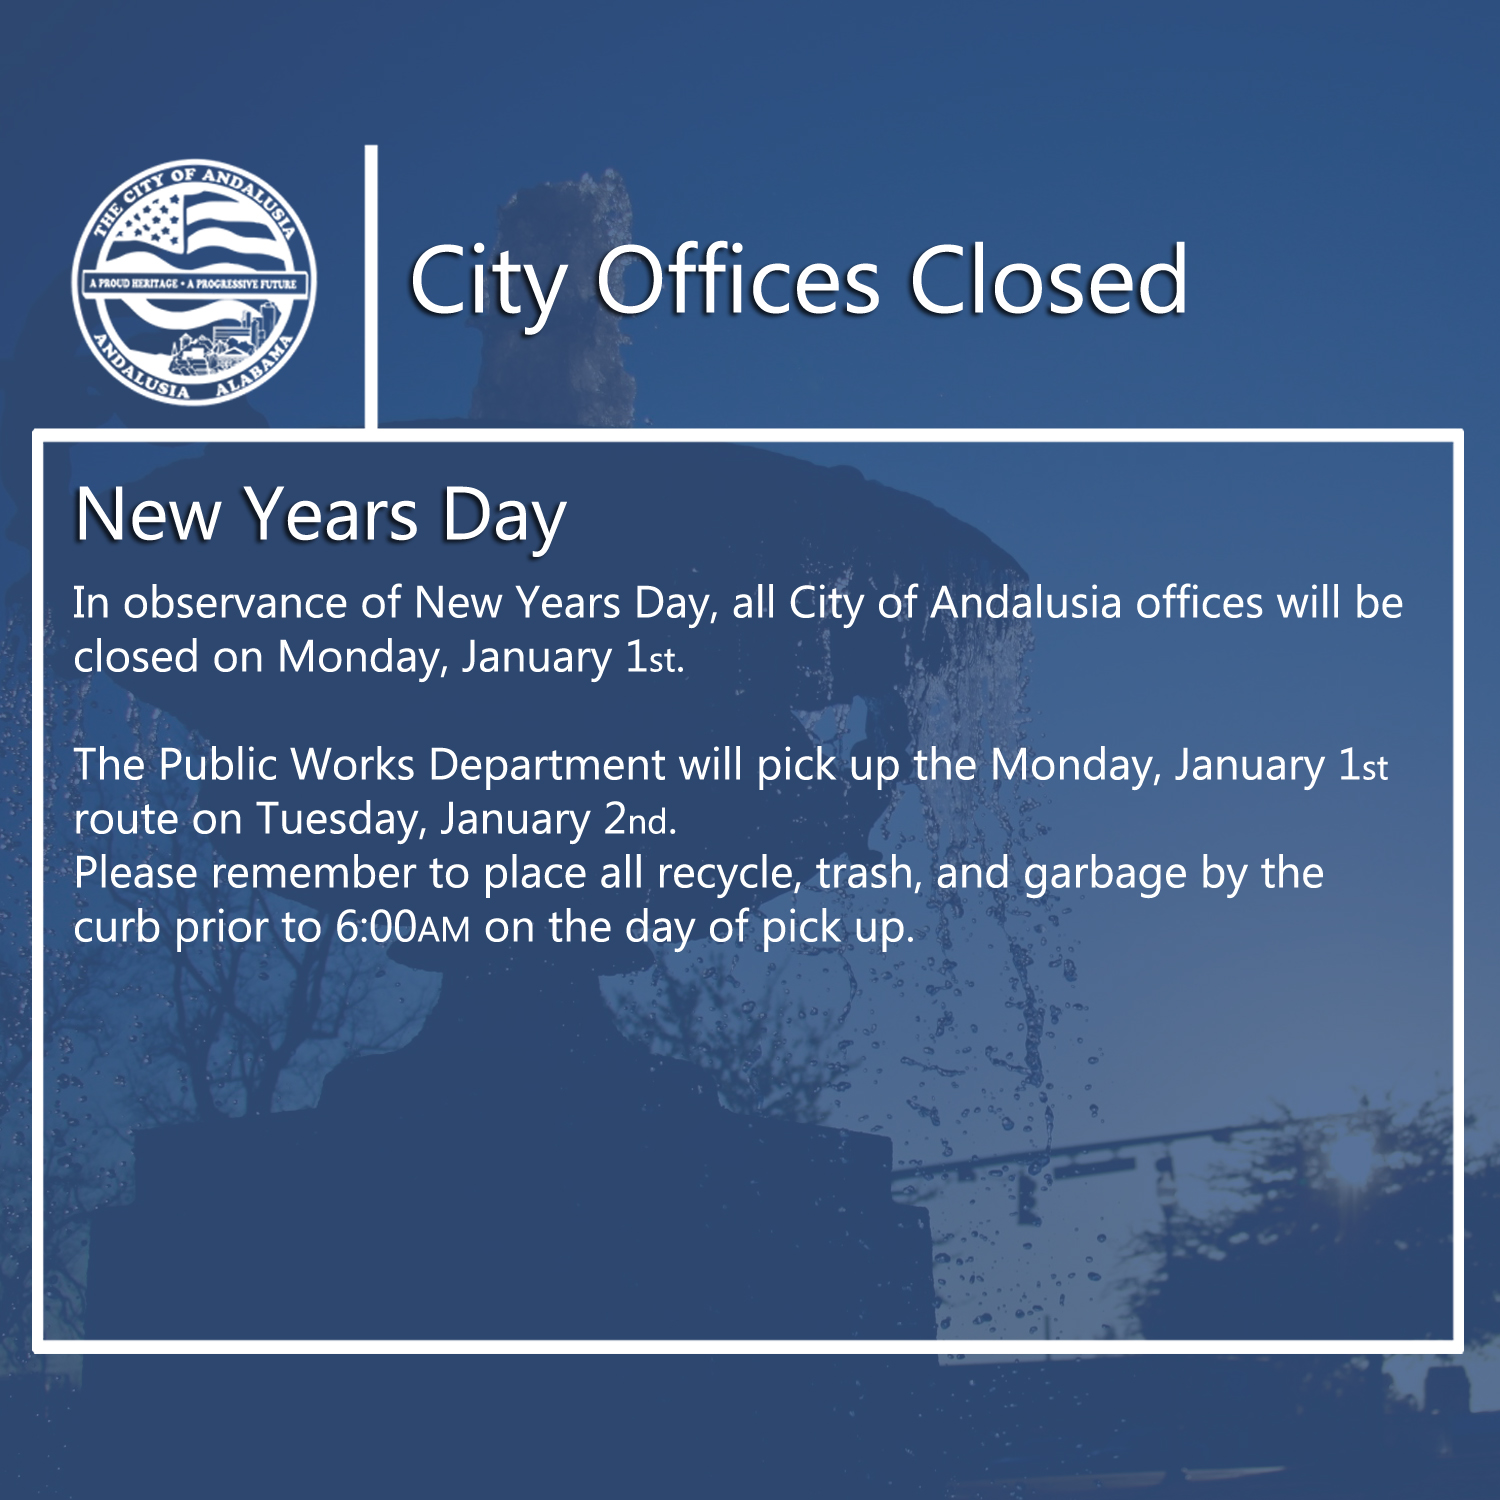 Facebook - City Offices Closed-News Years Day.jpg